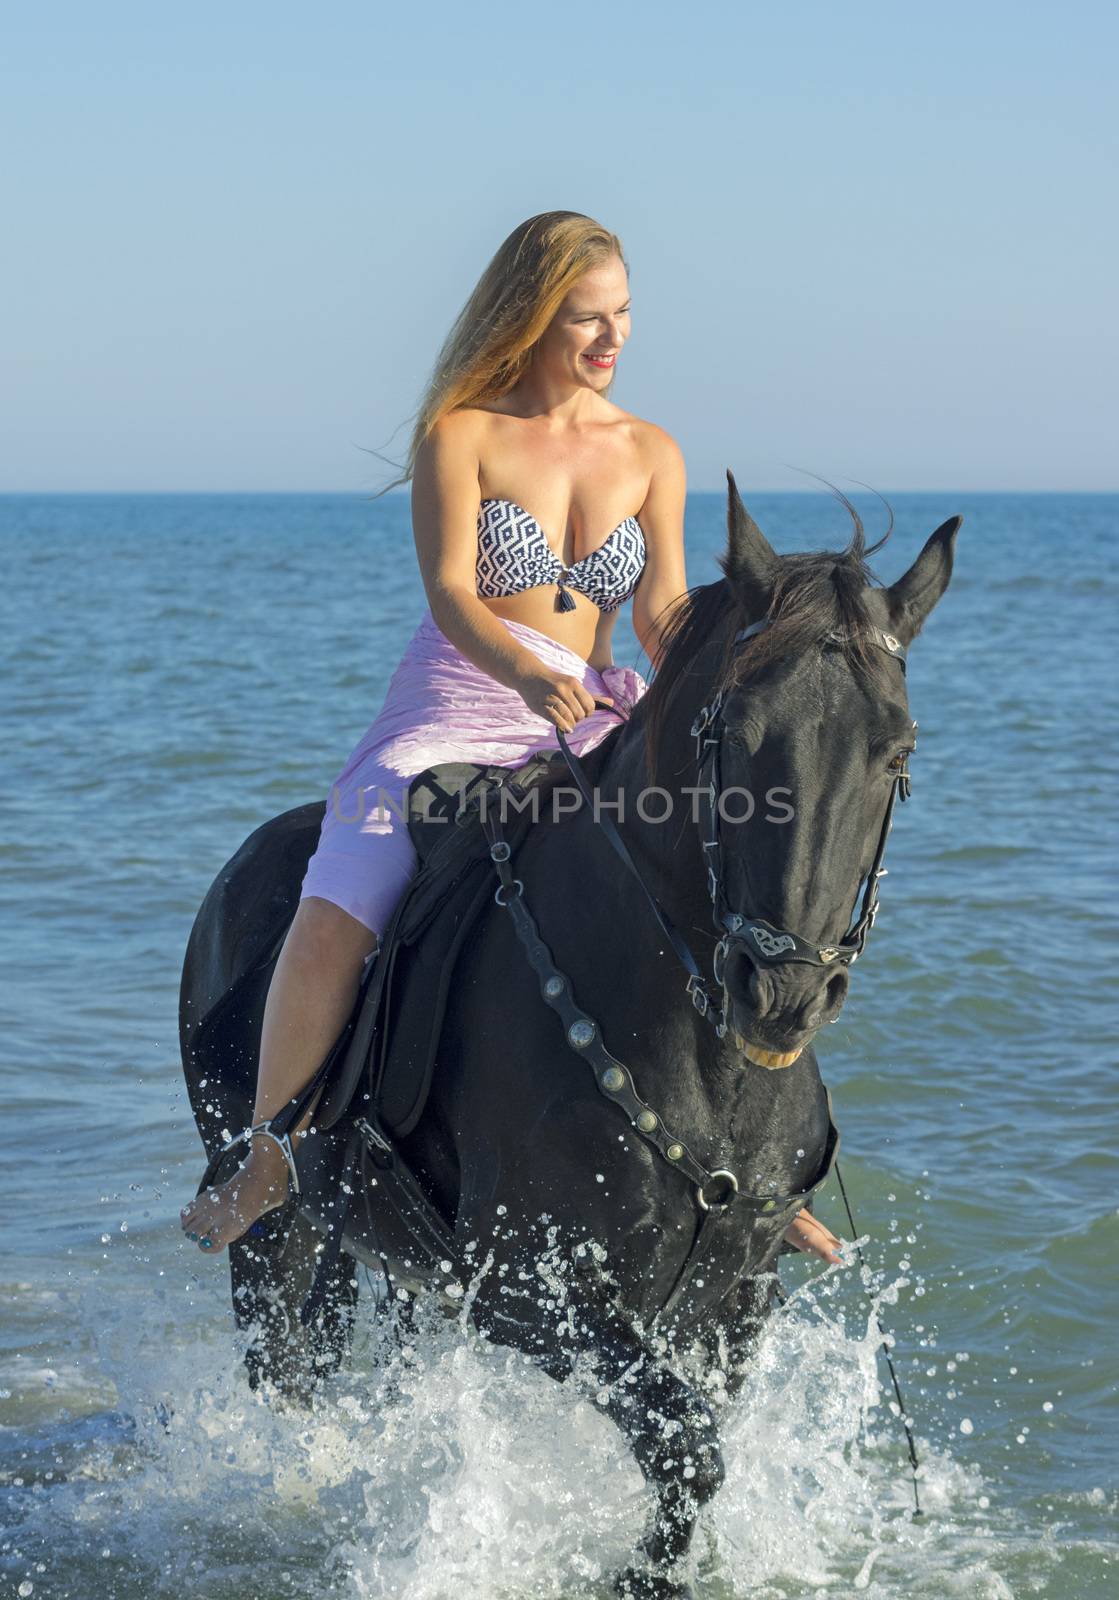 horsewoman and horse in the sea by cynoclub